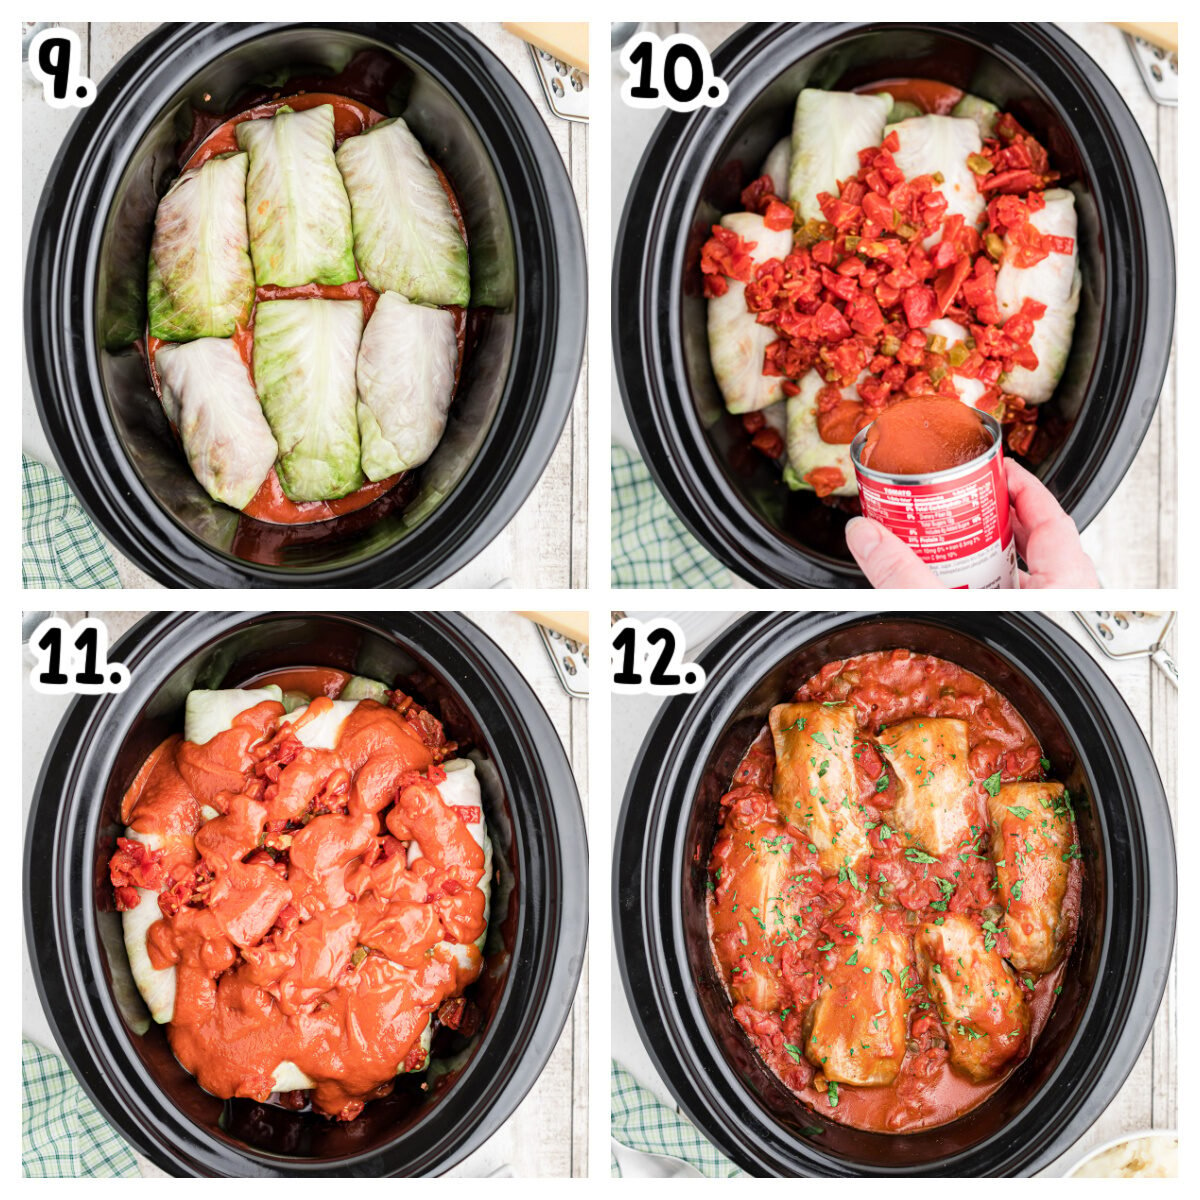 4 Images showing how to assemble and layer cabbage rolls in the slow cooker.